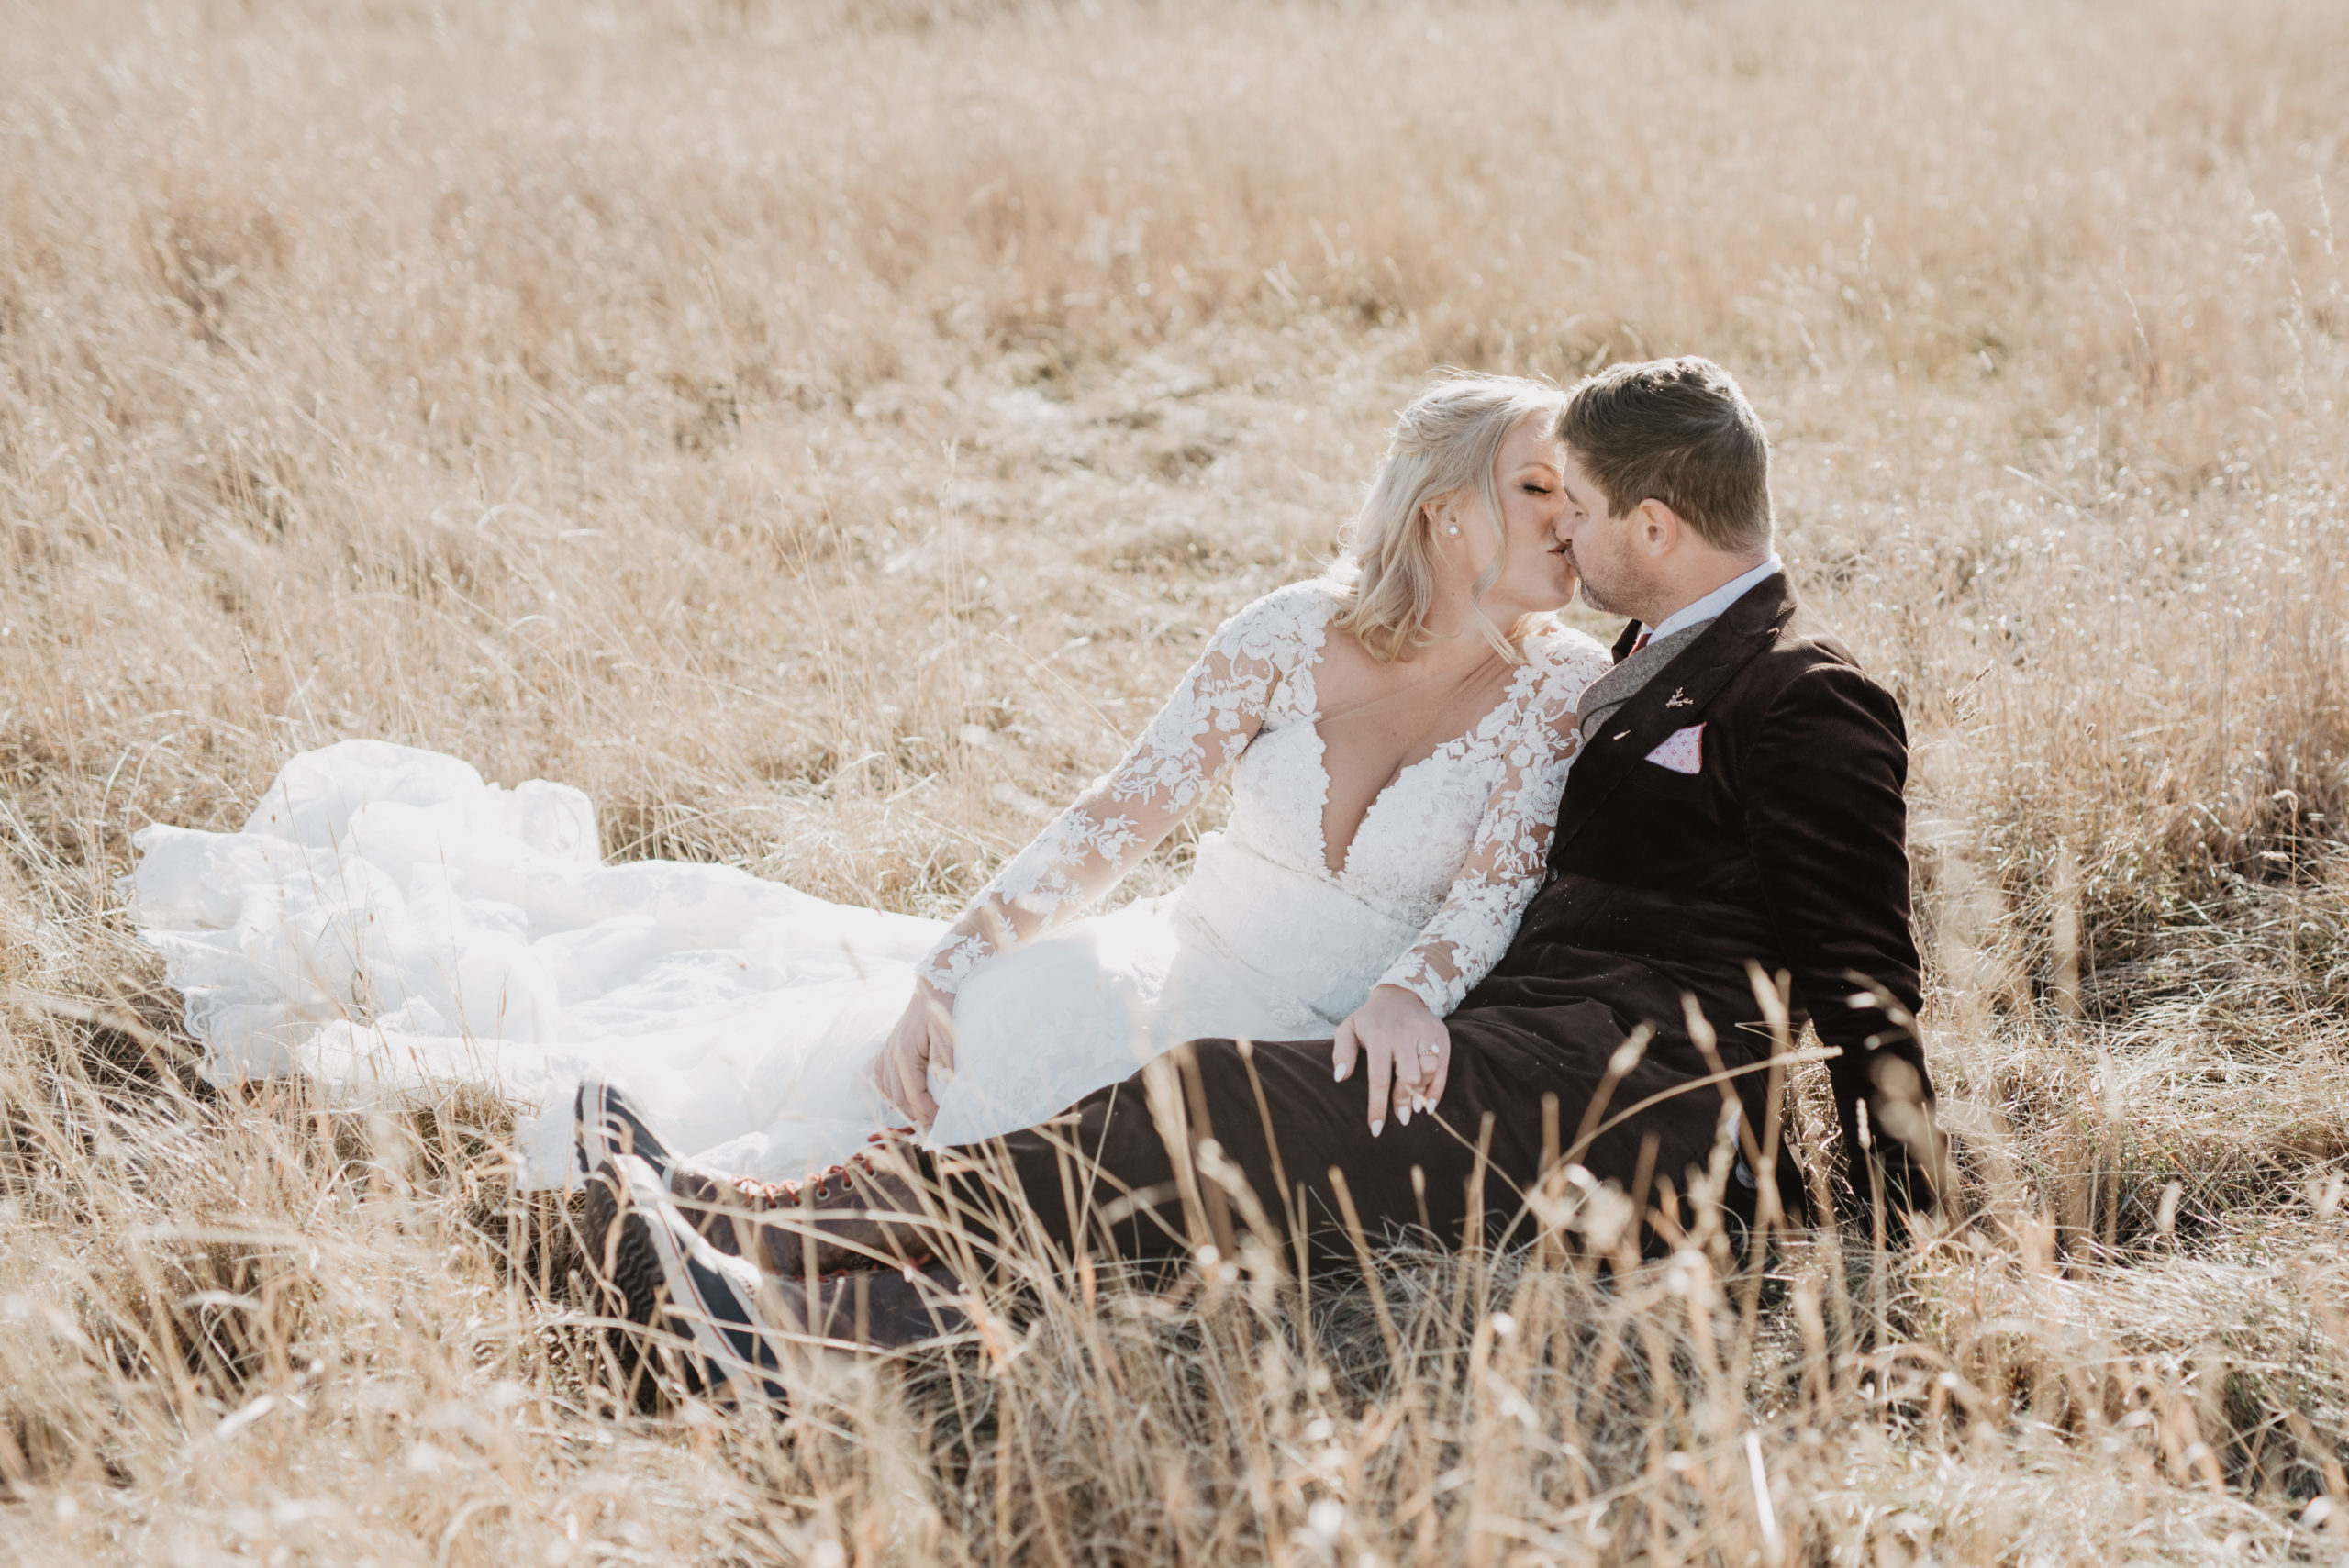 Grand Teton National Park wedding photographer captures bride and groom sitting in a golden field in the Tetons as they kiss for their fall wedding